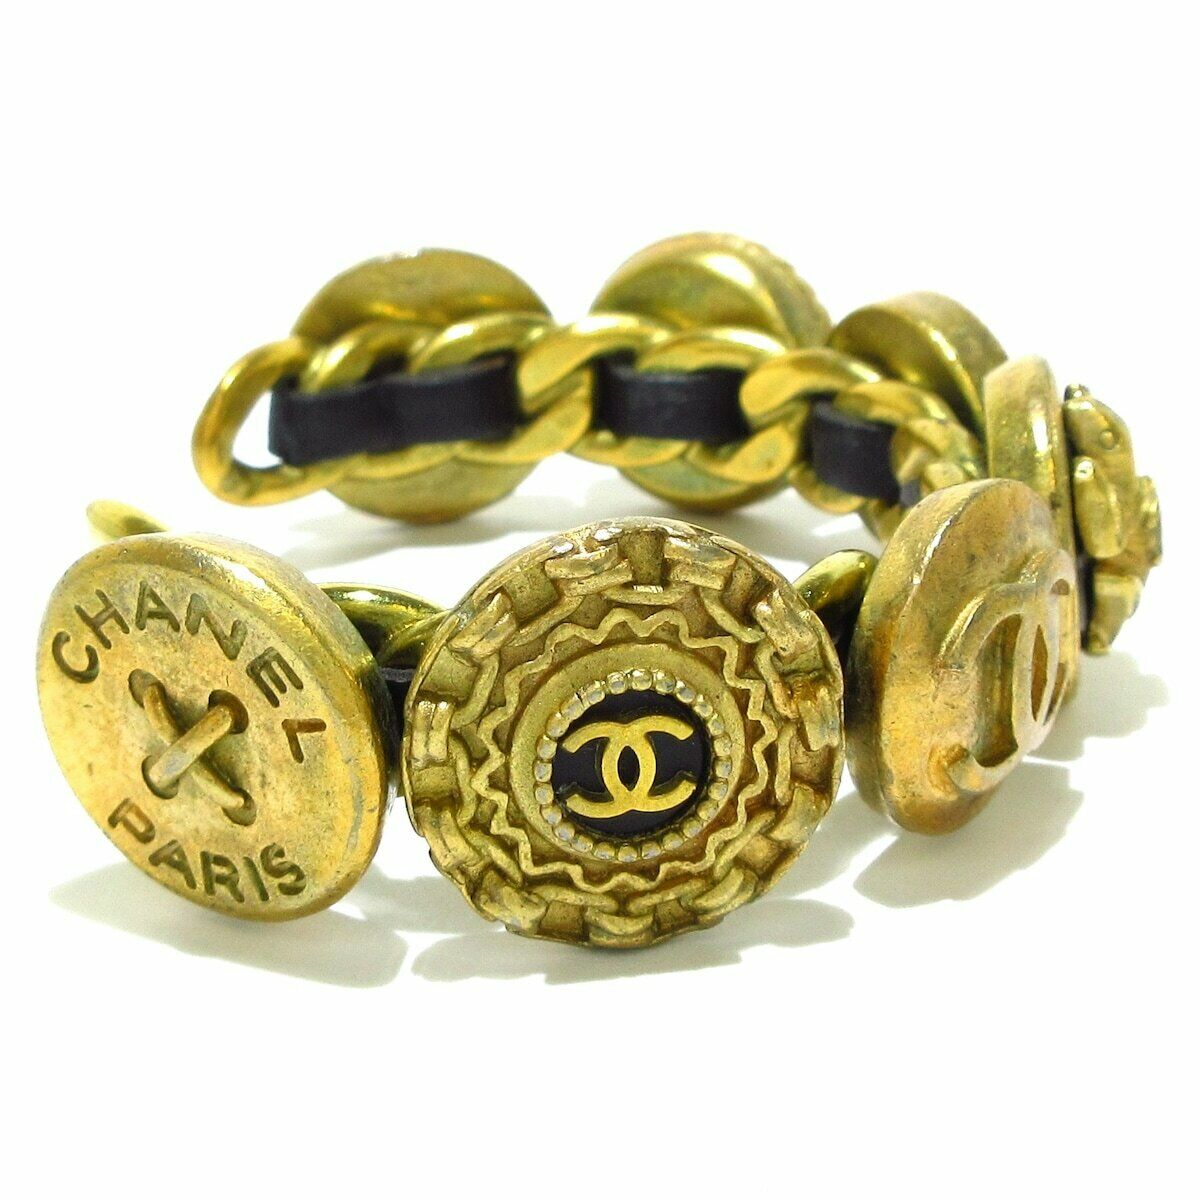 Vintage Chanel cuff bracelet bangle 7 icon charm black round - aptiques by Authentic PreOwned